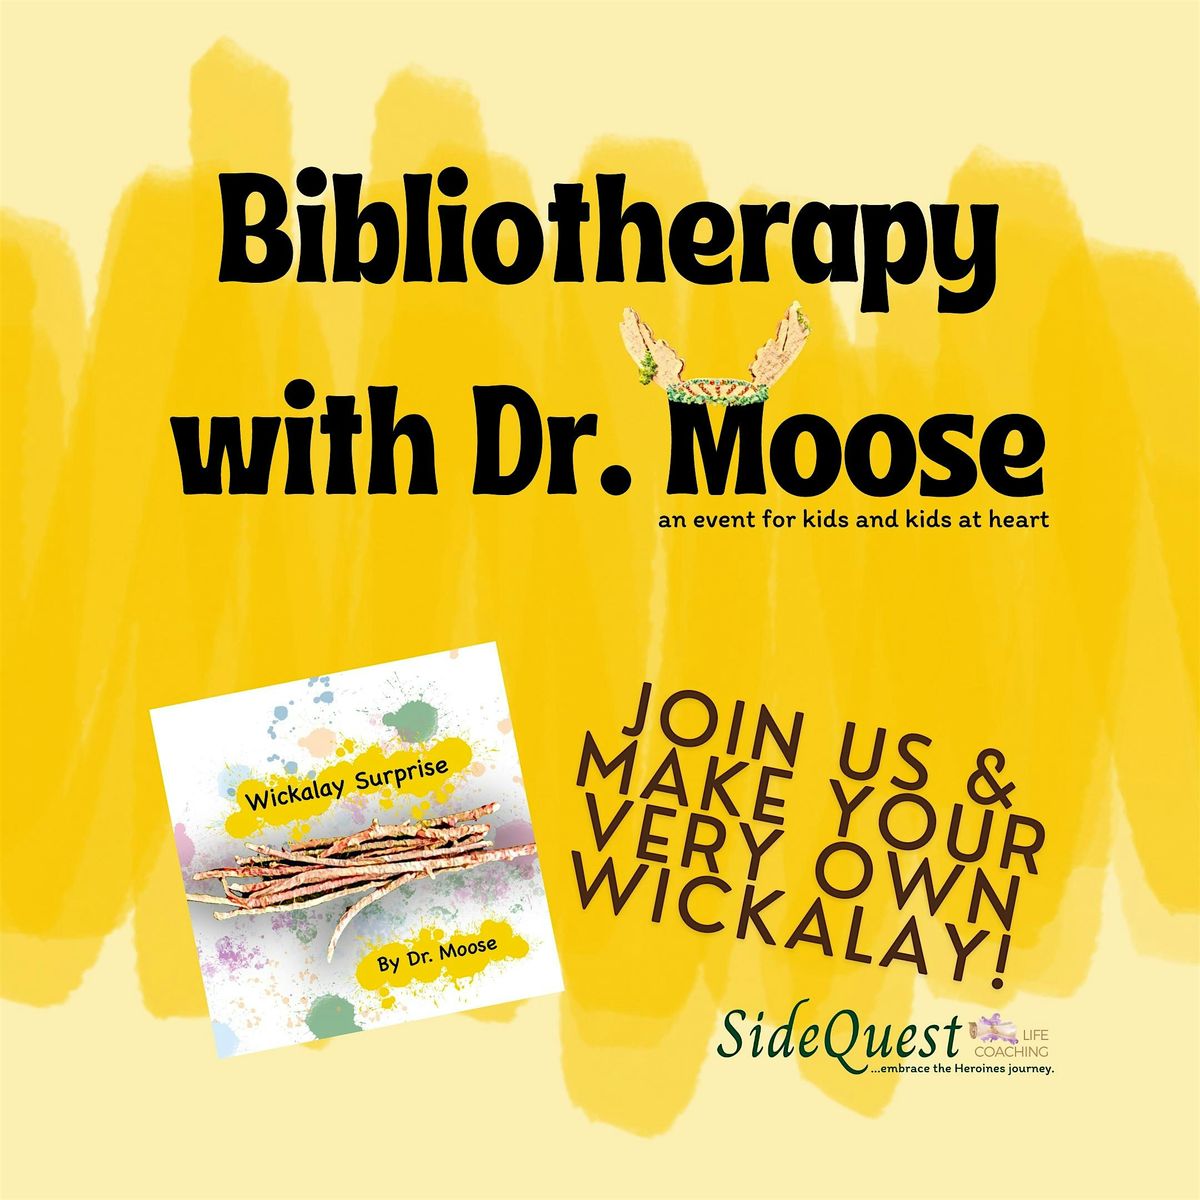 Bibliotherapy with Dr. Moose